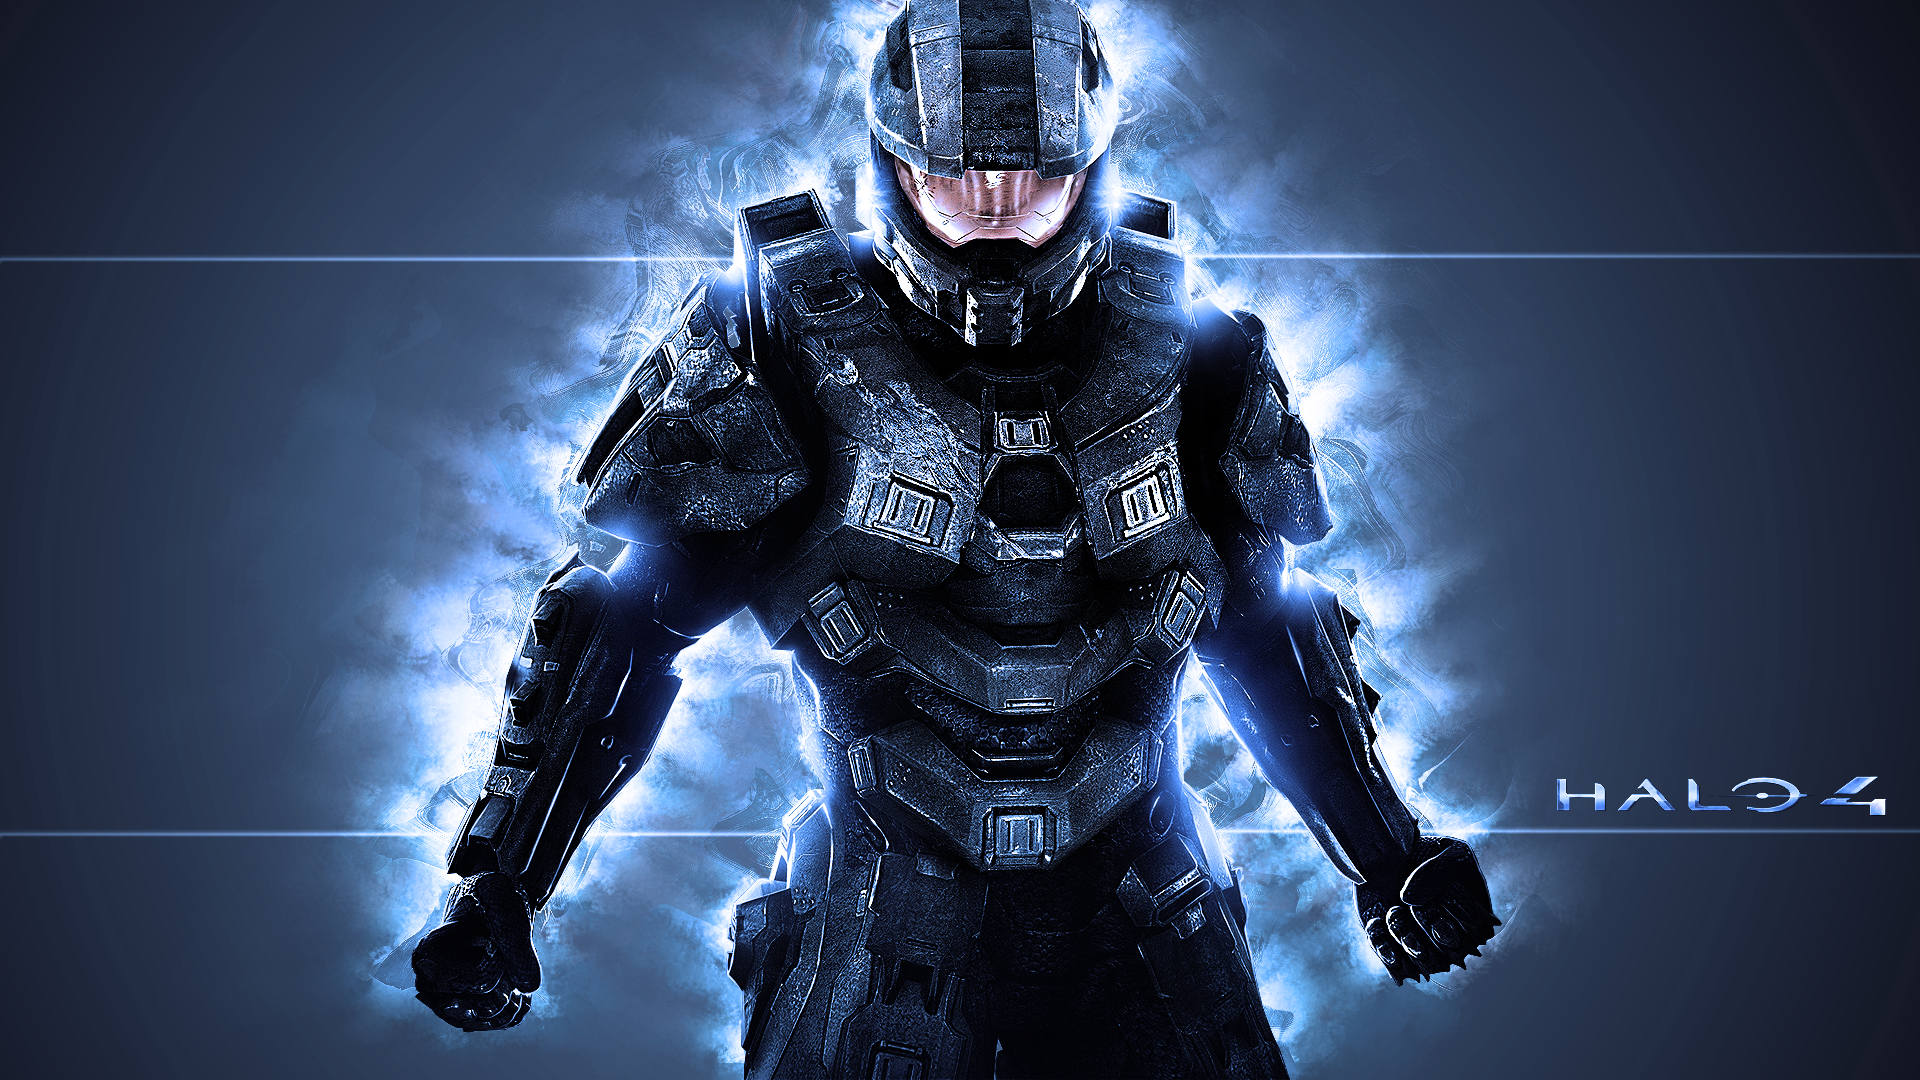 Halo 4 Master Chief Exclusive HD Wallpapers 2985 1920x1080